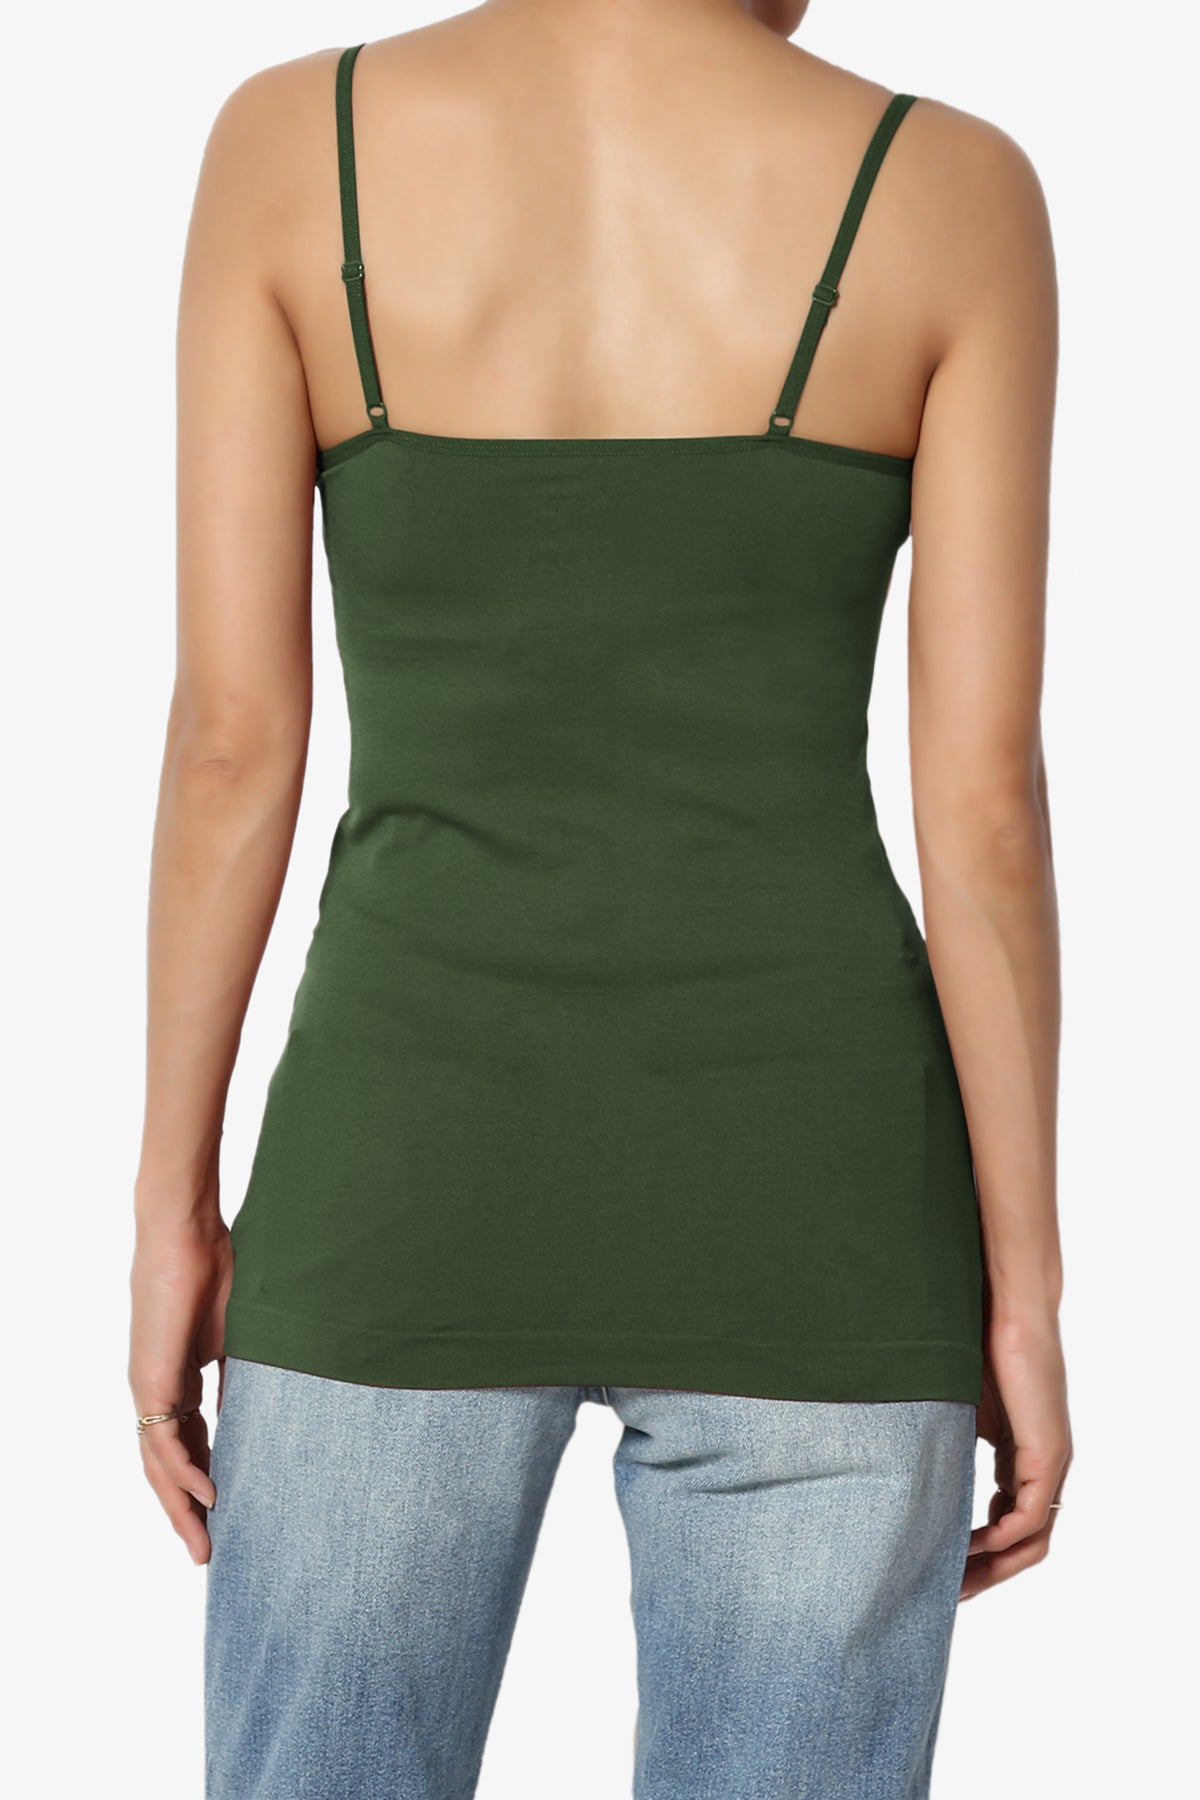 Load image into Gallery viewer, Himari Seamless Camisole Top ARMY GREEN_2
